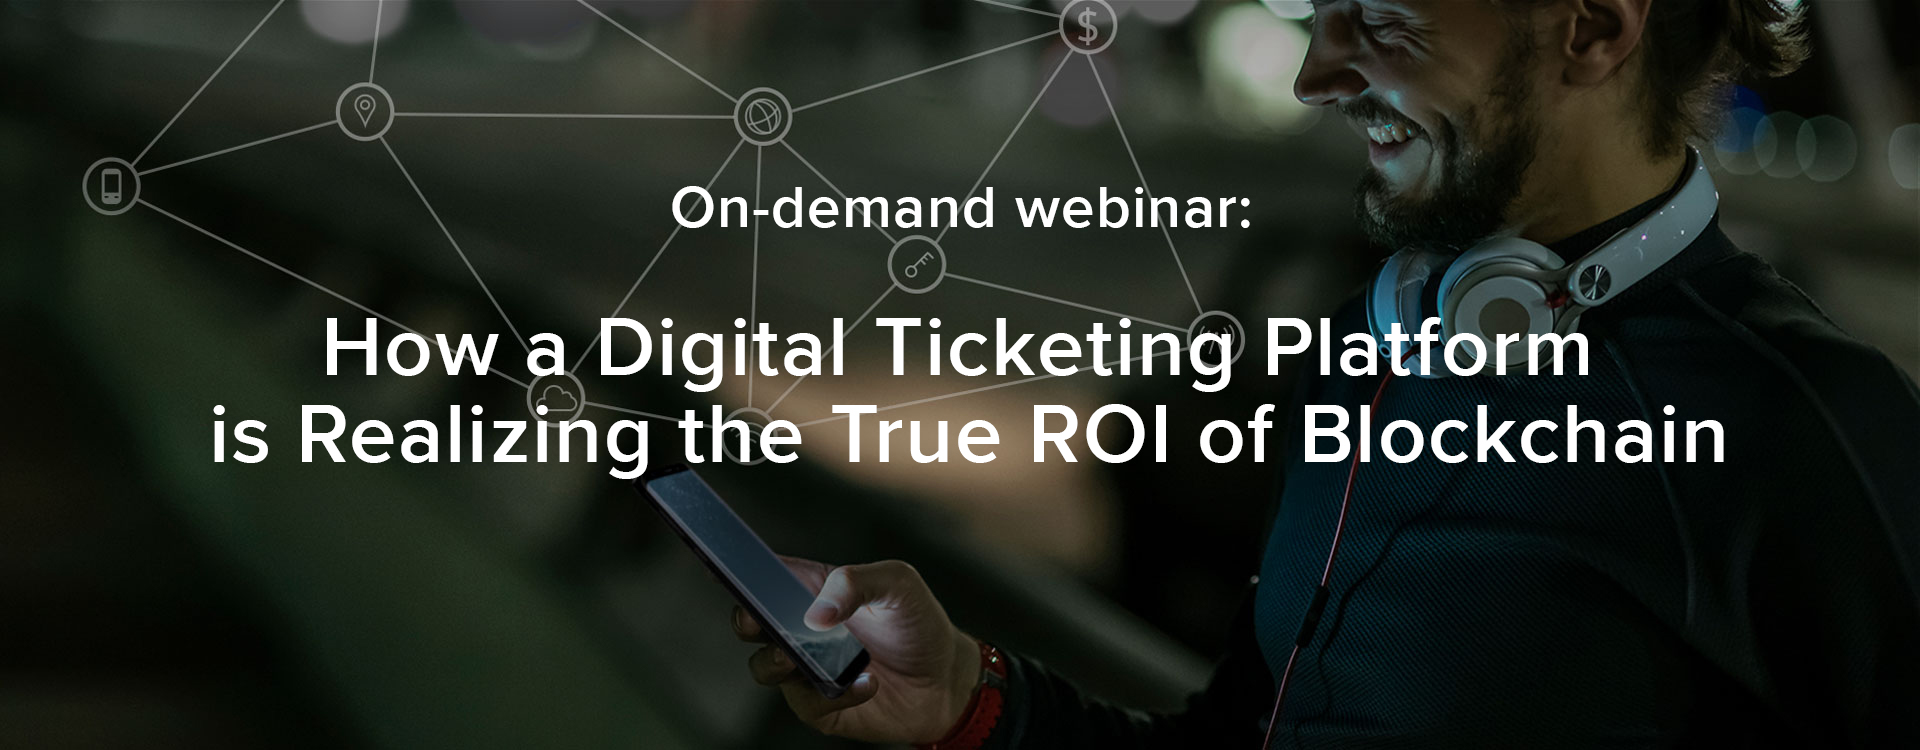 how a digital ticketing platform is realizing the true ROI of blockchain